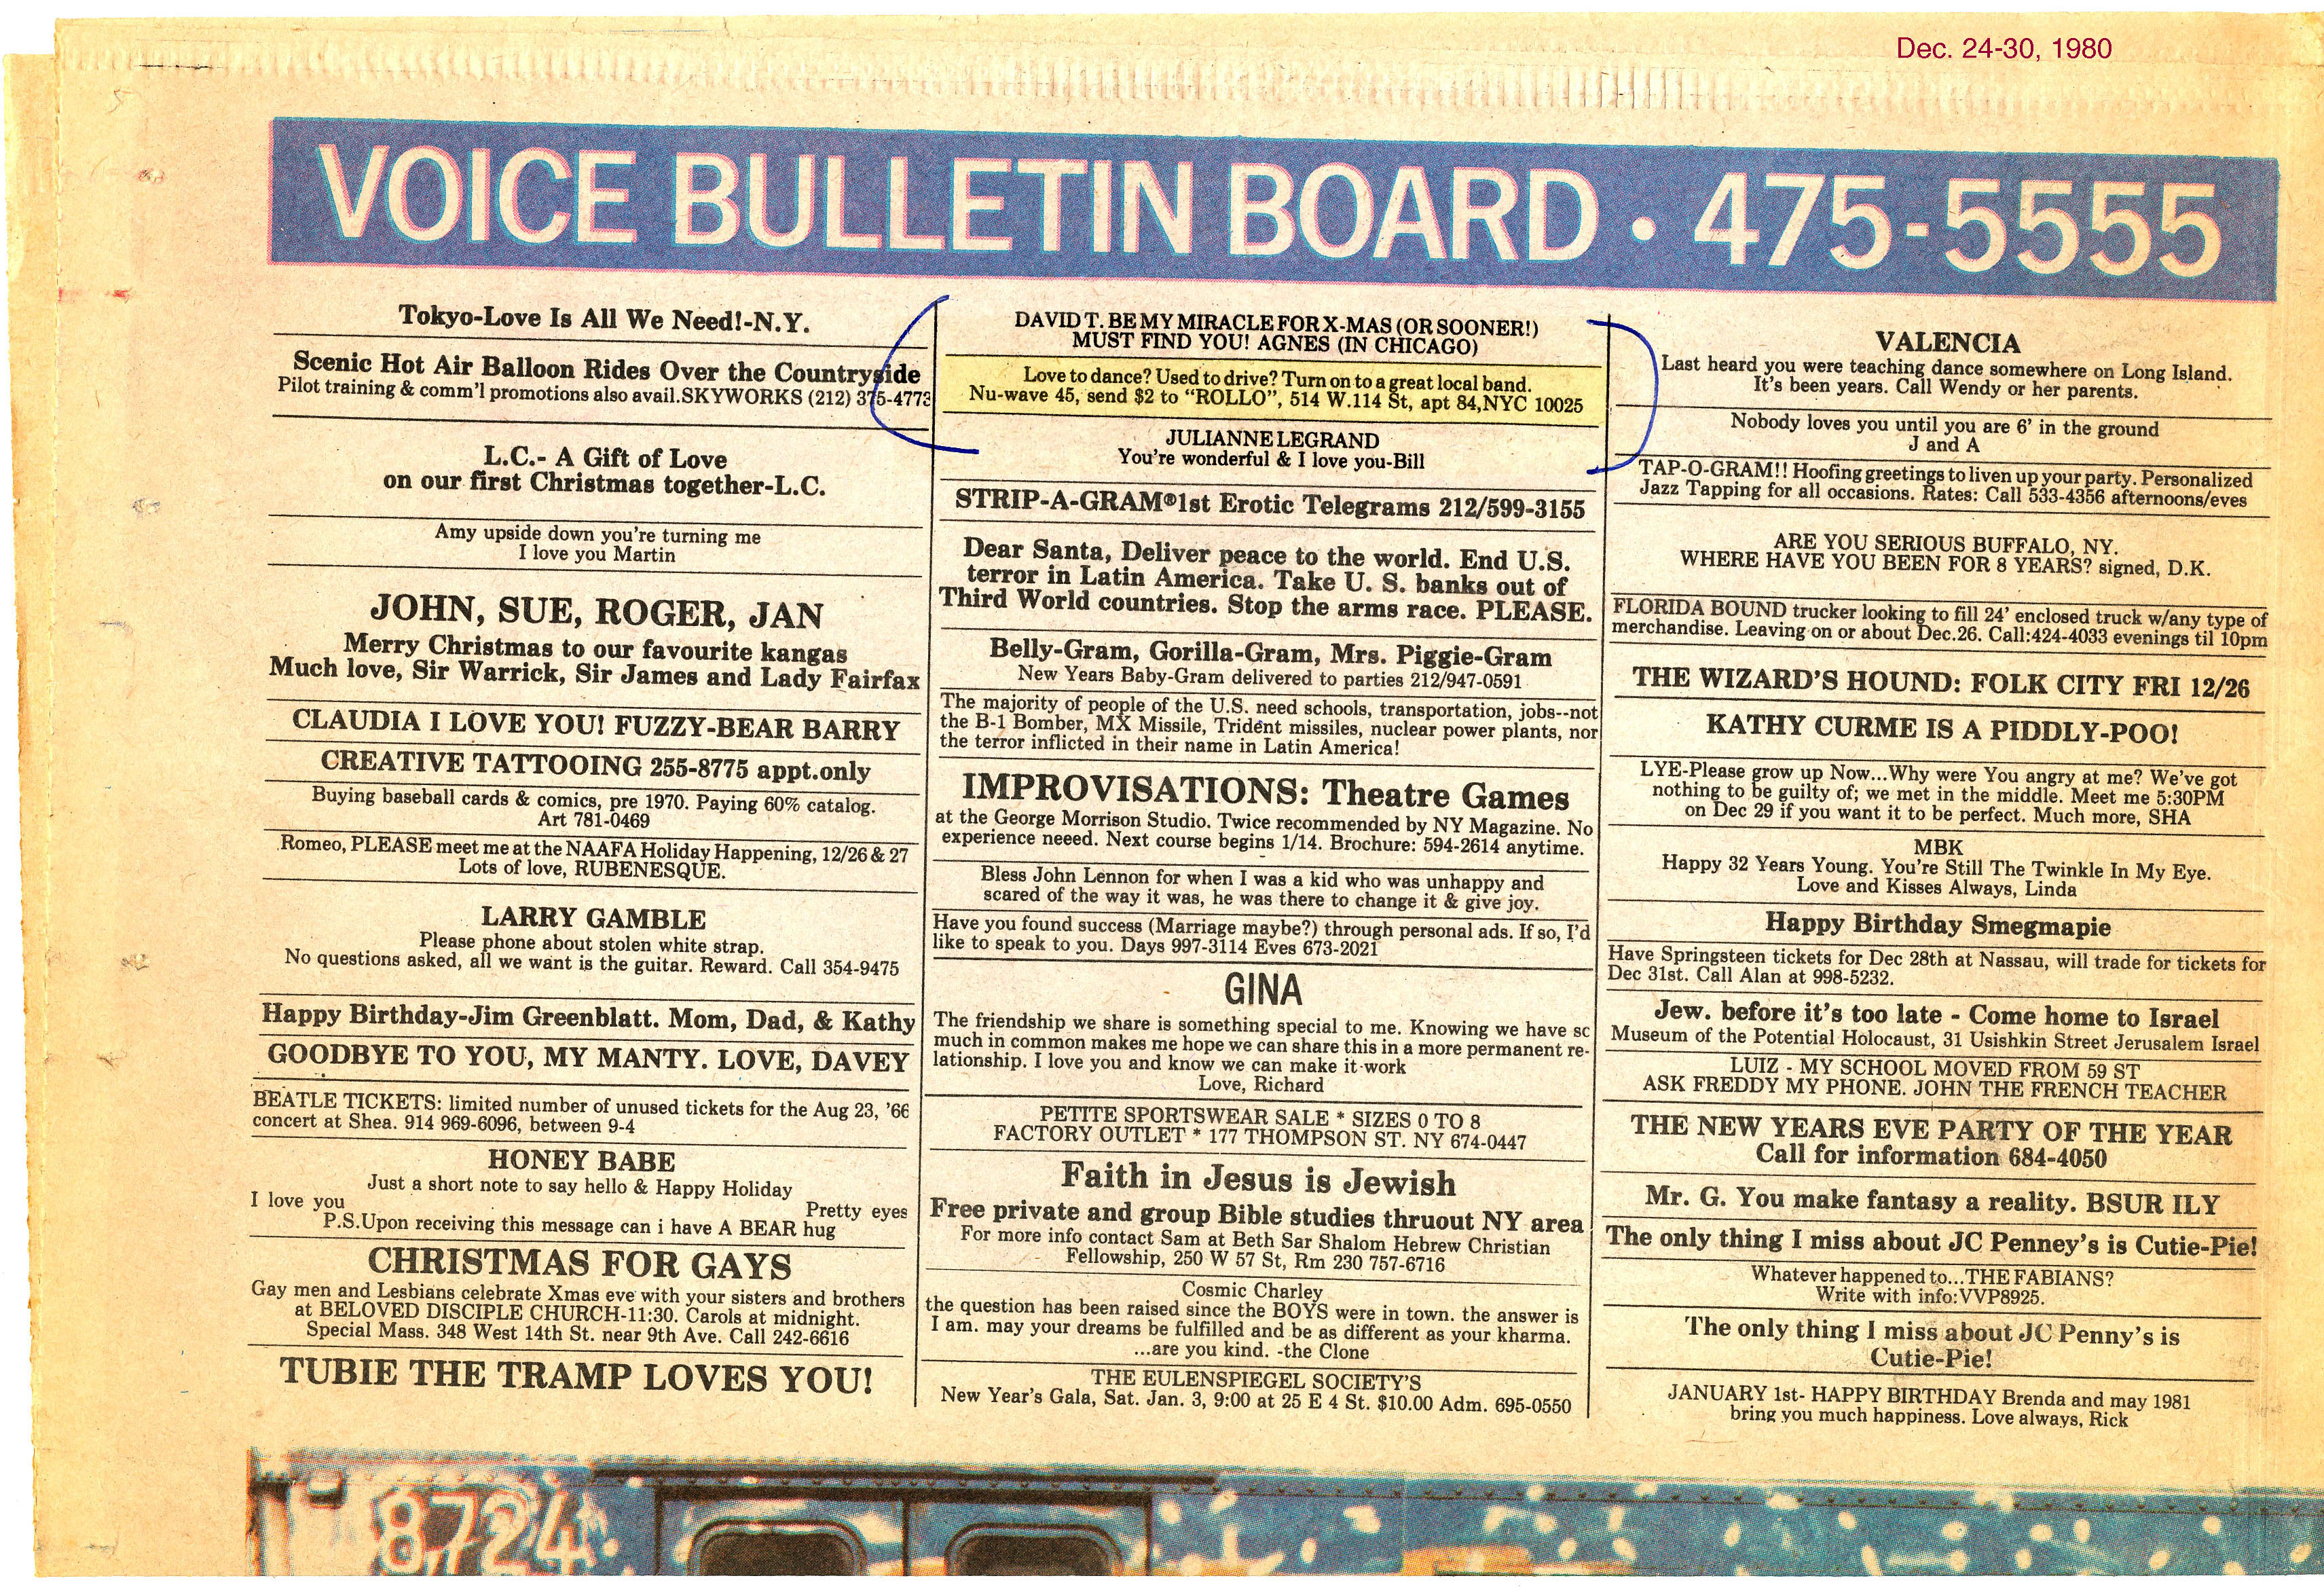 Rollo ad for Heyday of the Automobile/After the Dance 45 record in Village Voice 12-24-1980